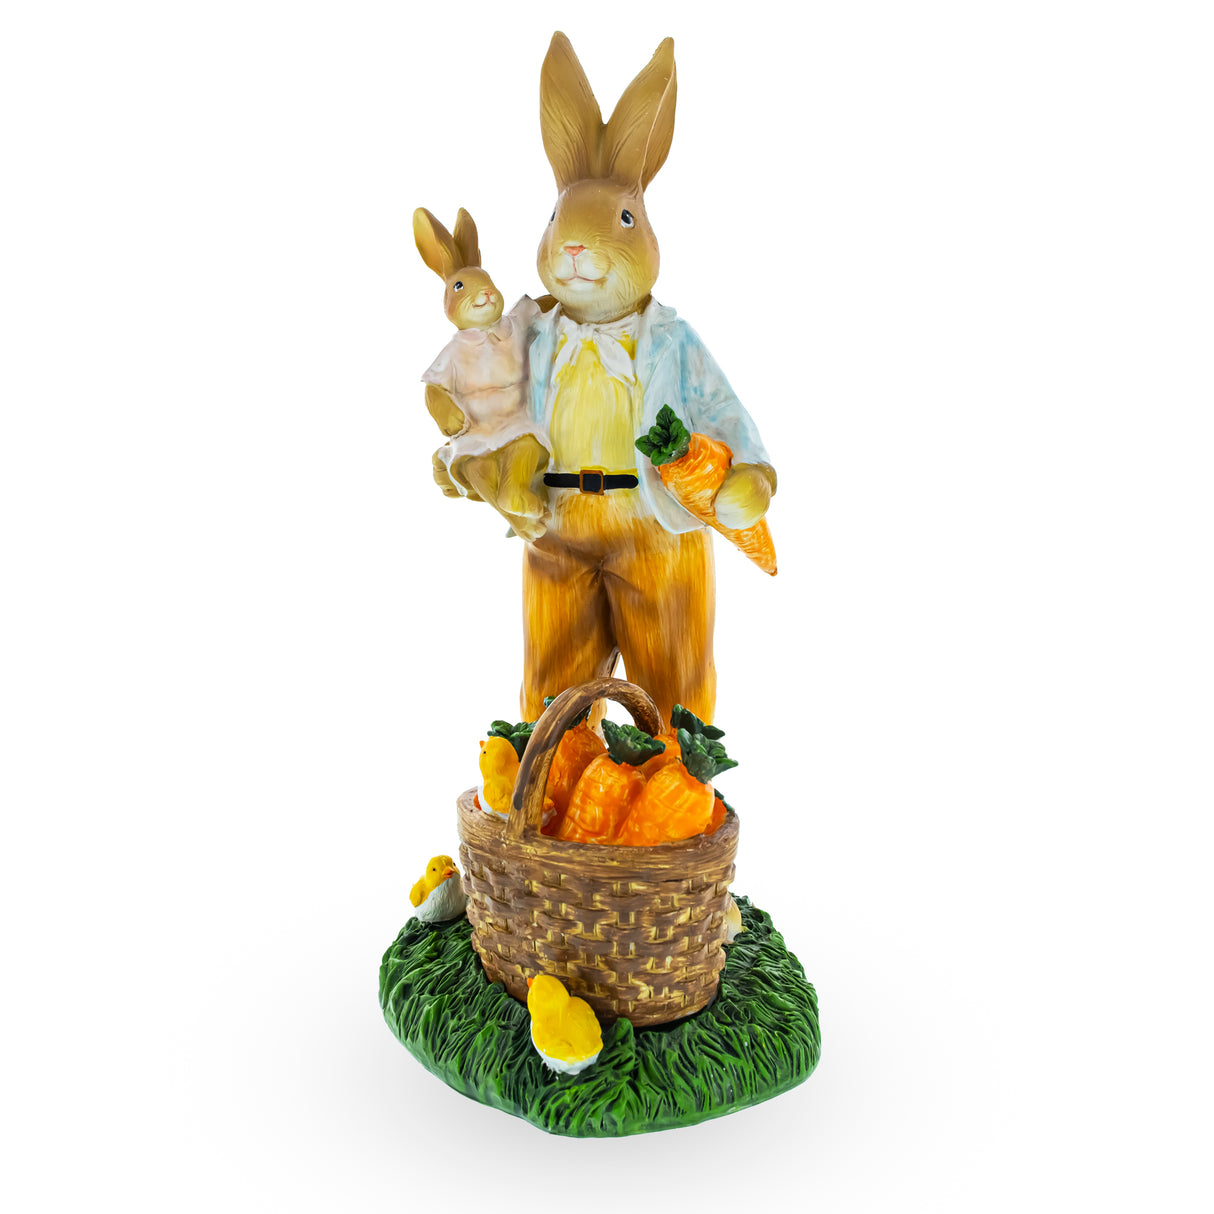 Father and Son Bunny Duo: Sharing a Basket of Harvested Carrots Figurine ,dimensions in inches: 11 x 5.5 x 5.5